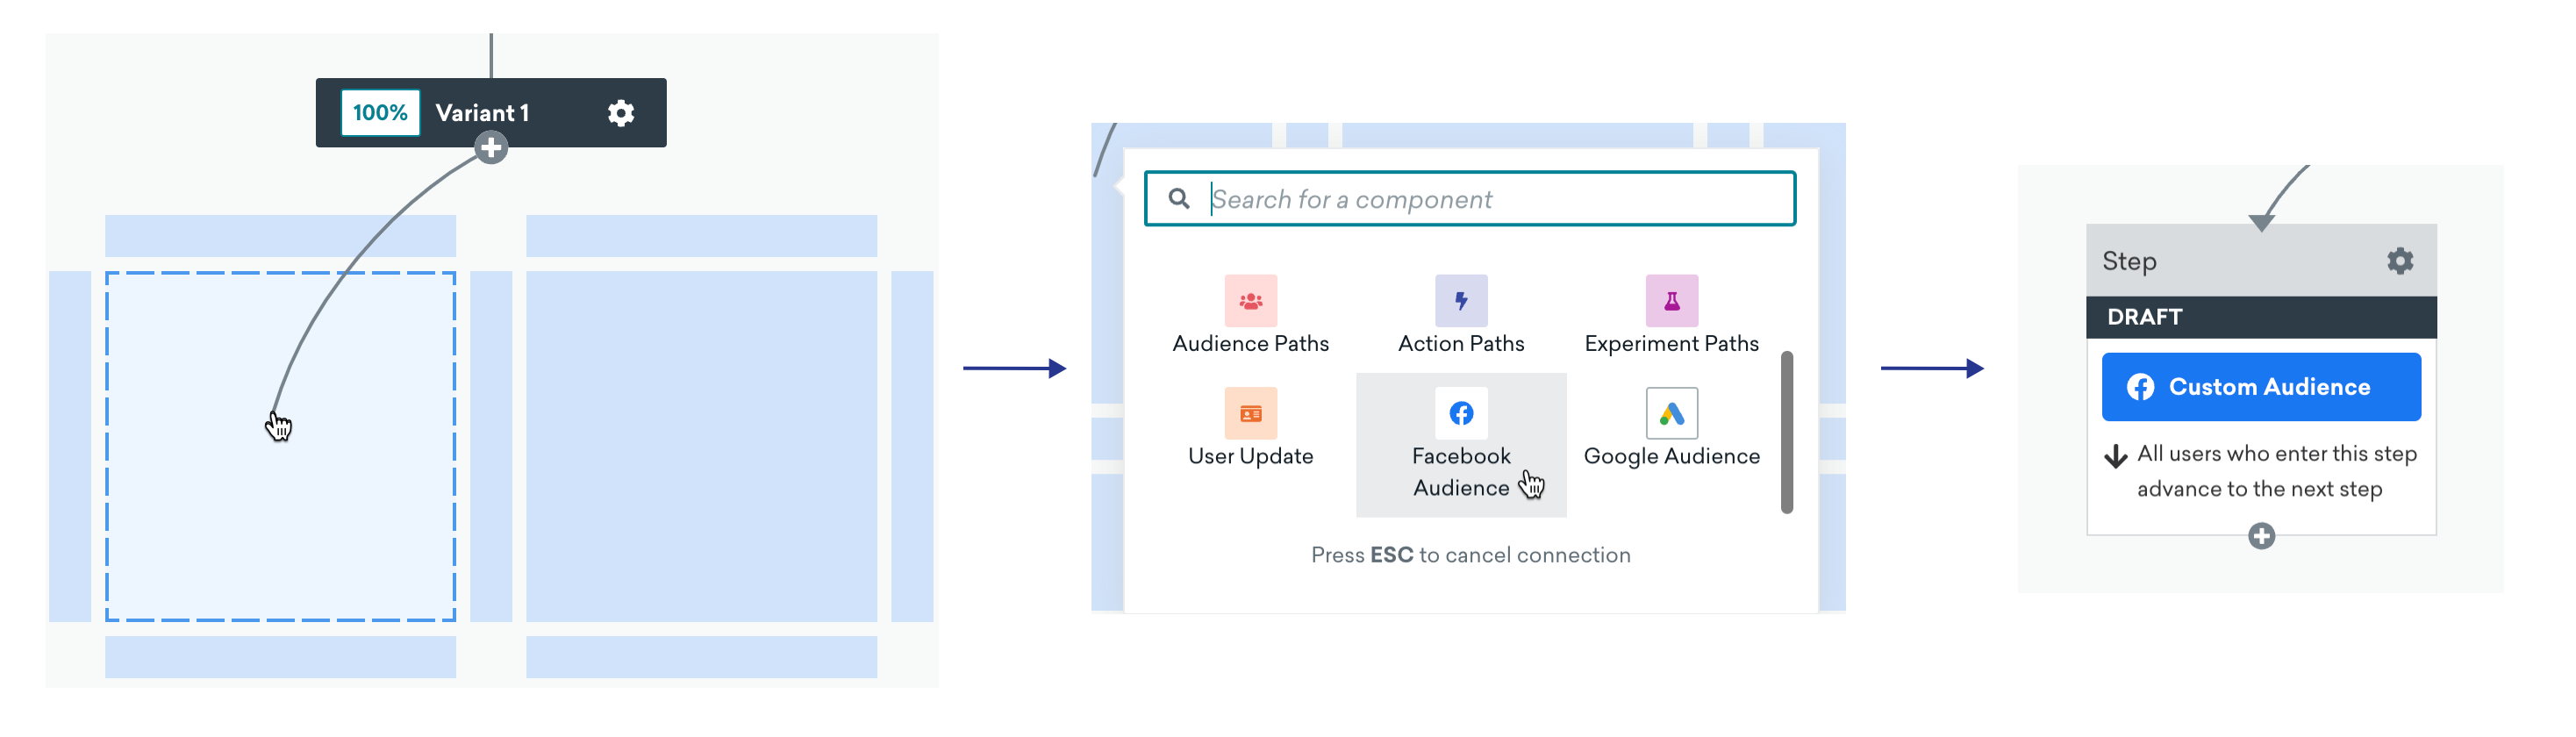 Workflow of the previous steps to add a Facebook Audience step in Canvas.